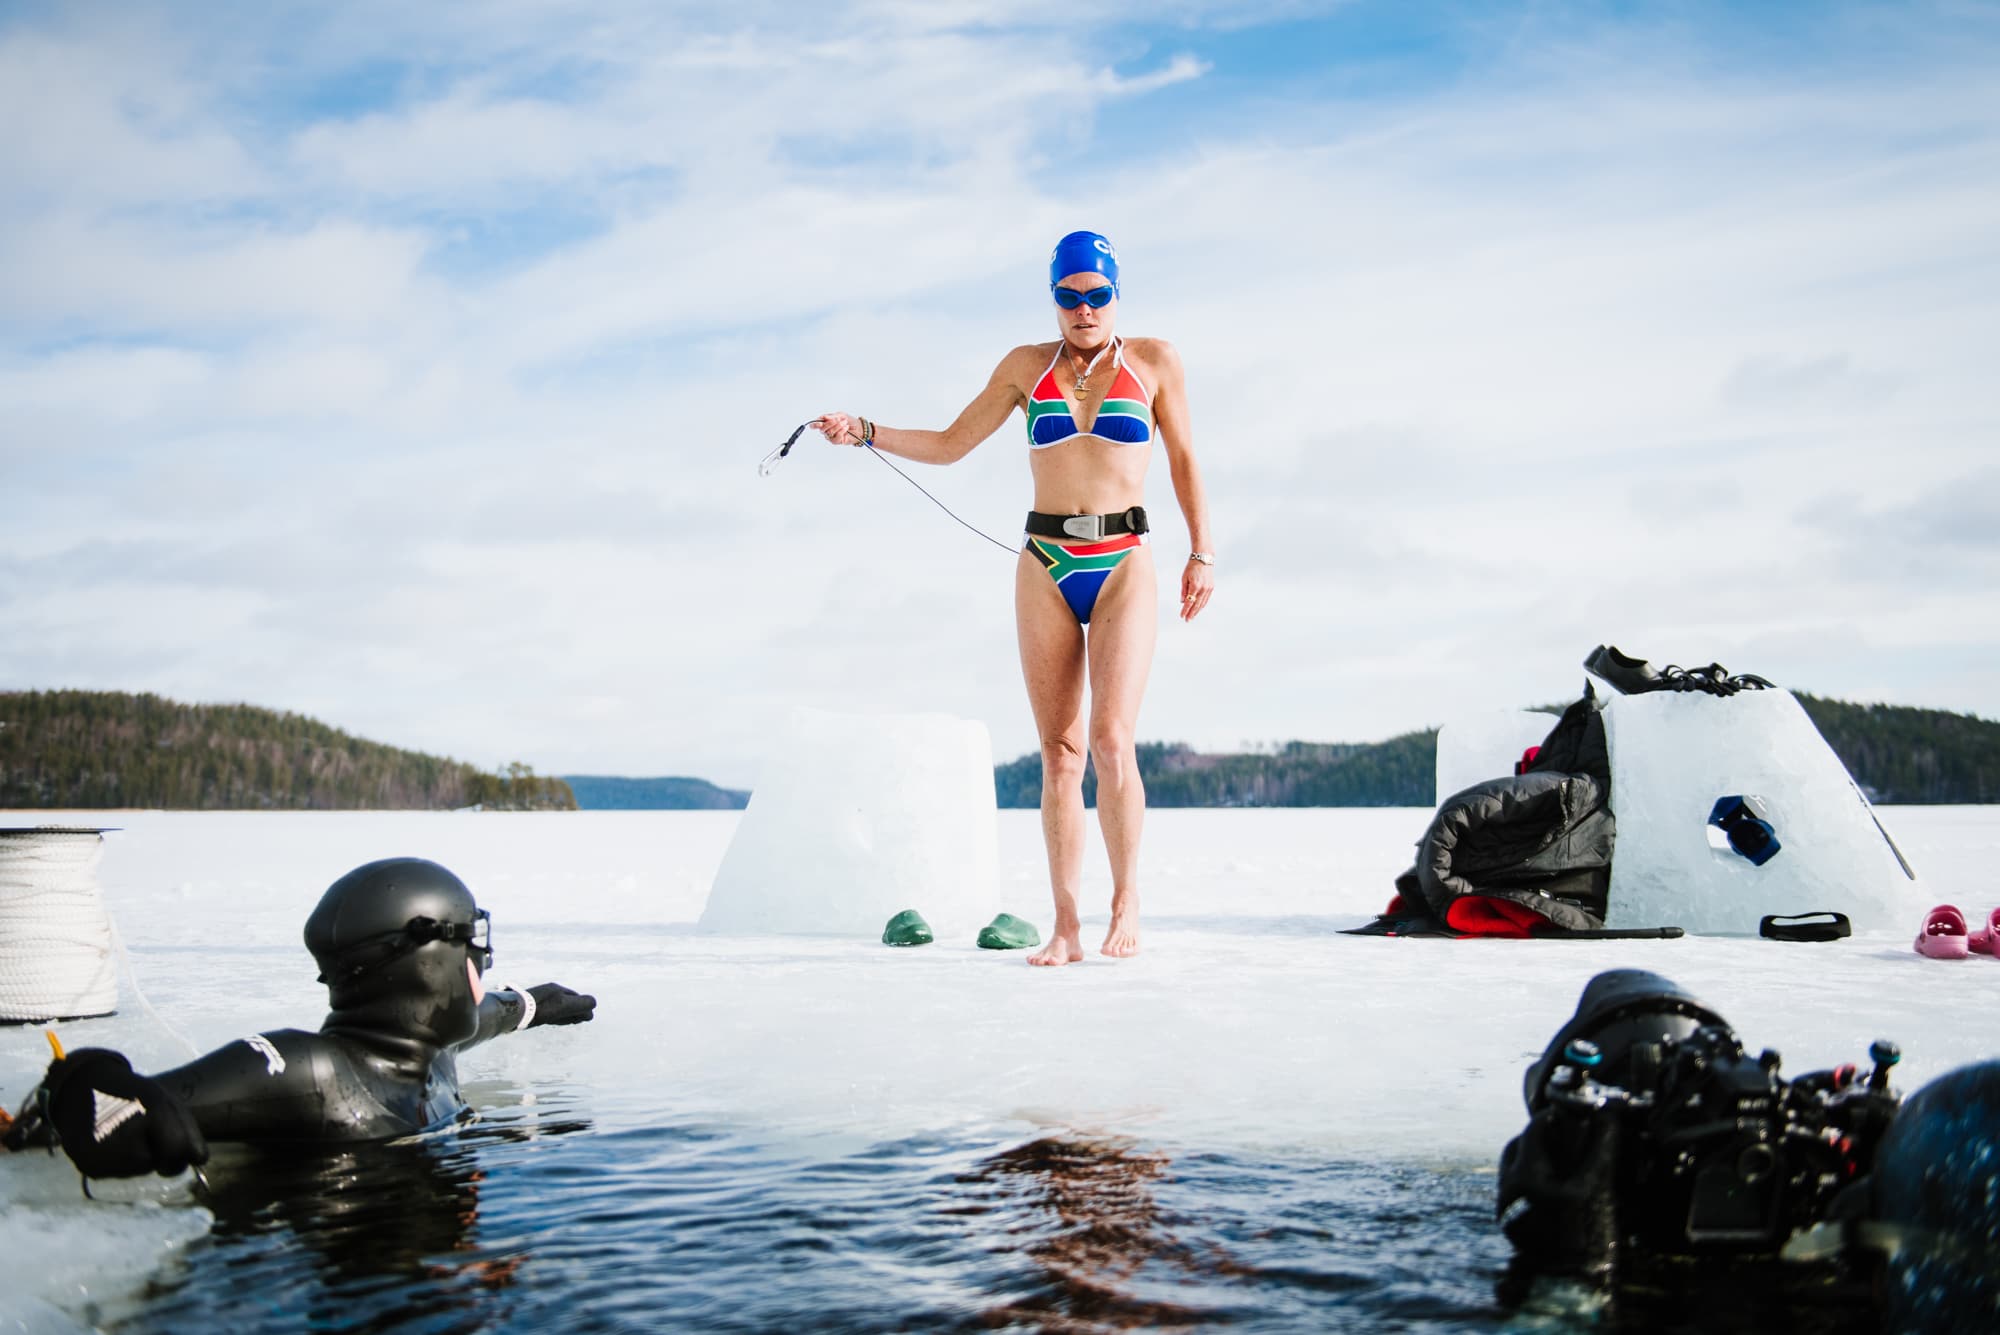 Story on South African freediver Amber Fillary trying to break the Guinness world record on March 21st, 2019, for diving 60 m under solid ice in nothing but a bikini.